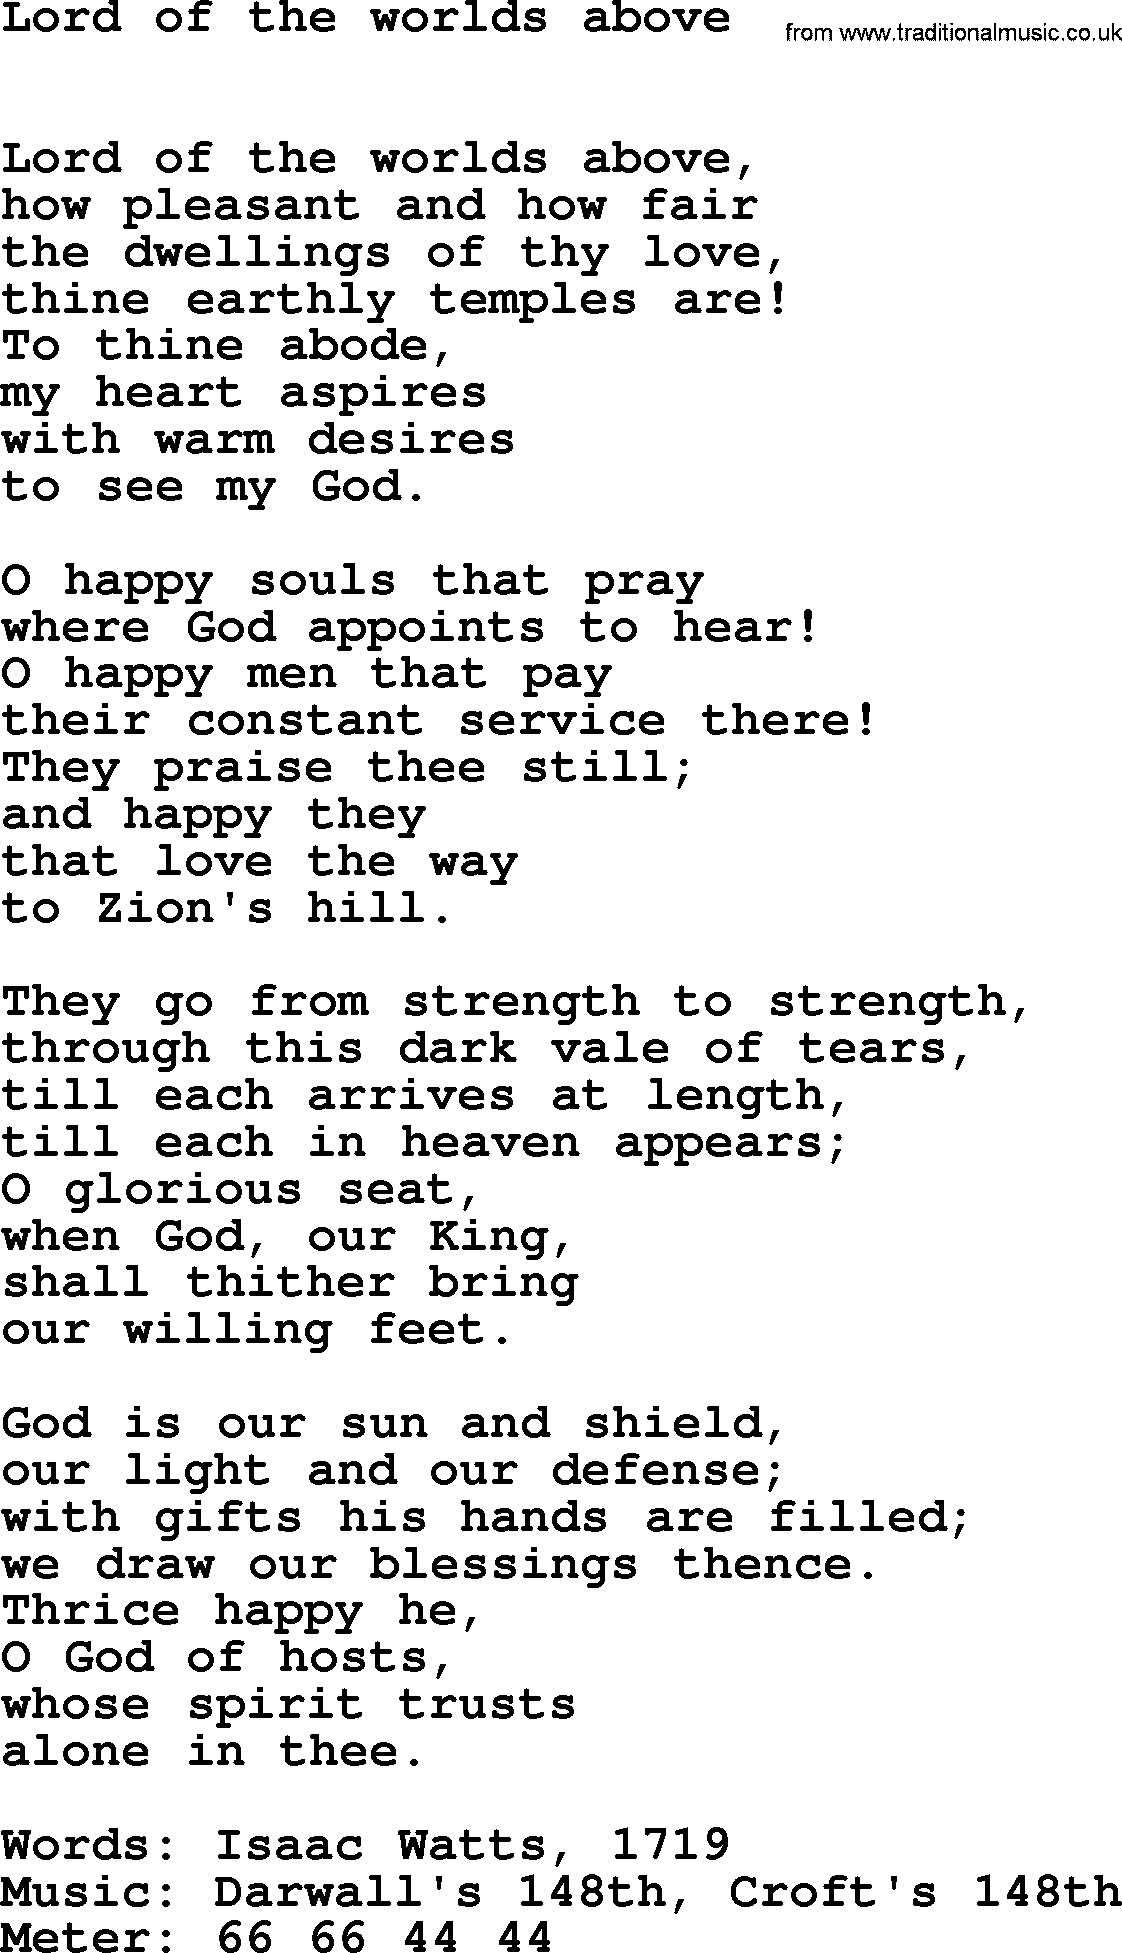 Book of Common Praise Hymn: Lord Of The Worlds Above.txt lyrics with midi music